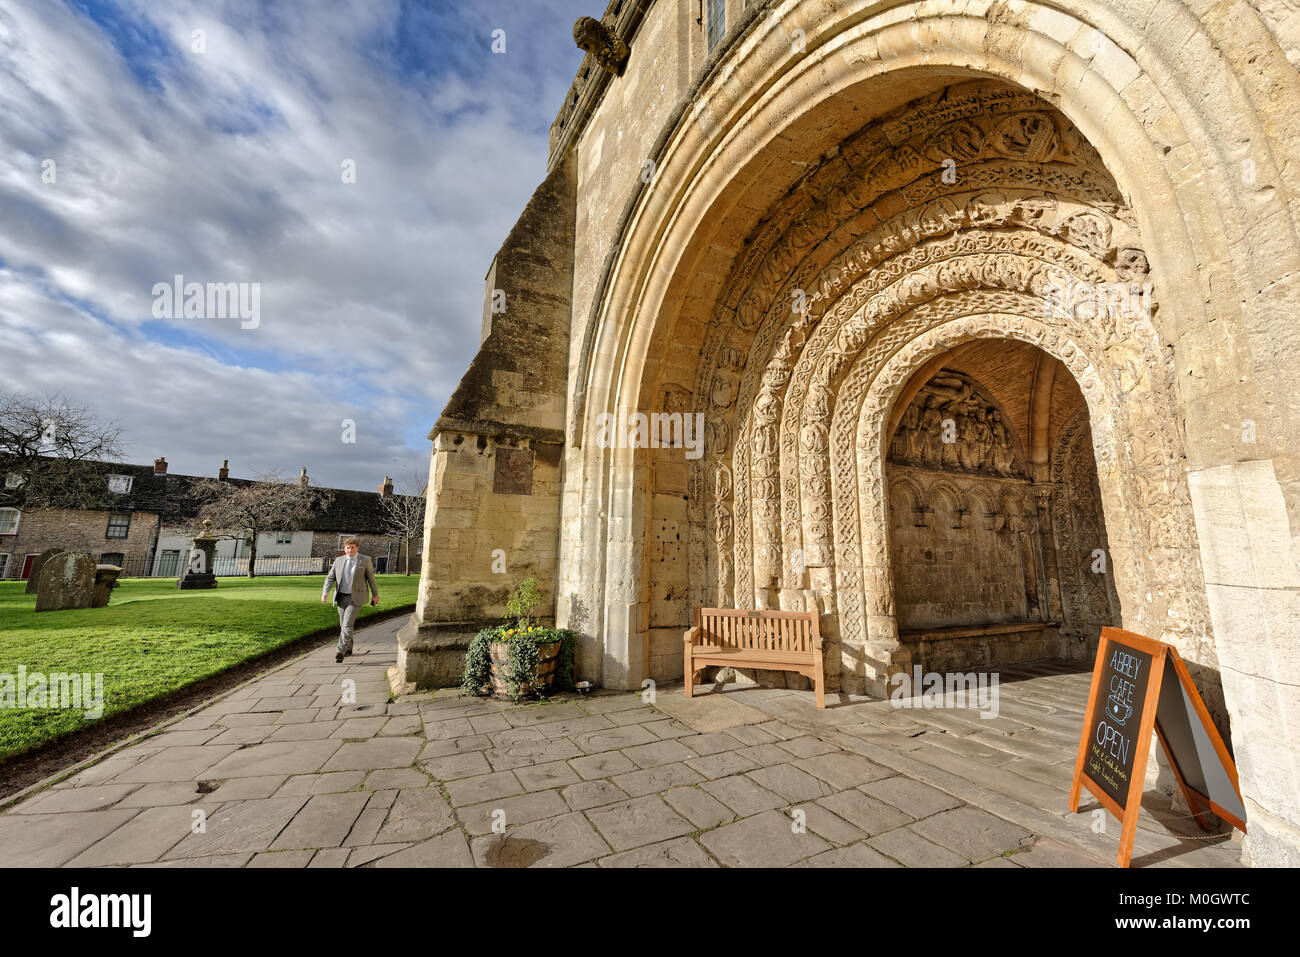 Malmesbury, UK. 22nd Jan, 2018. UK Weather. The Norman porch at Malmesbury Abbey, widely regarded as one of the finest examples of its kind in western Europe, is bathed in sunshine after a weekend of cold and wet weather in Wiltshire. Credit: Terry Mathews/Alamy Live News Stock Photo